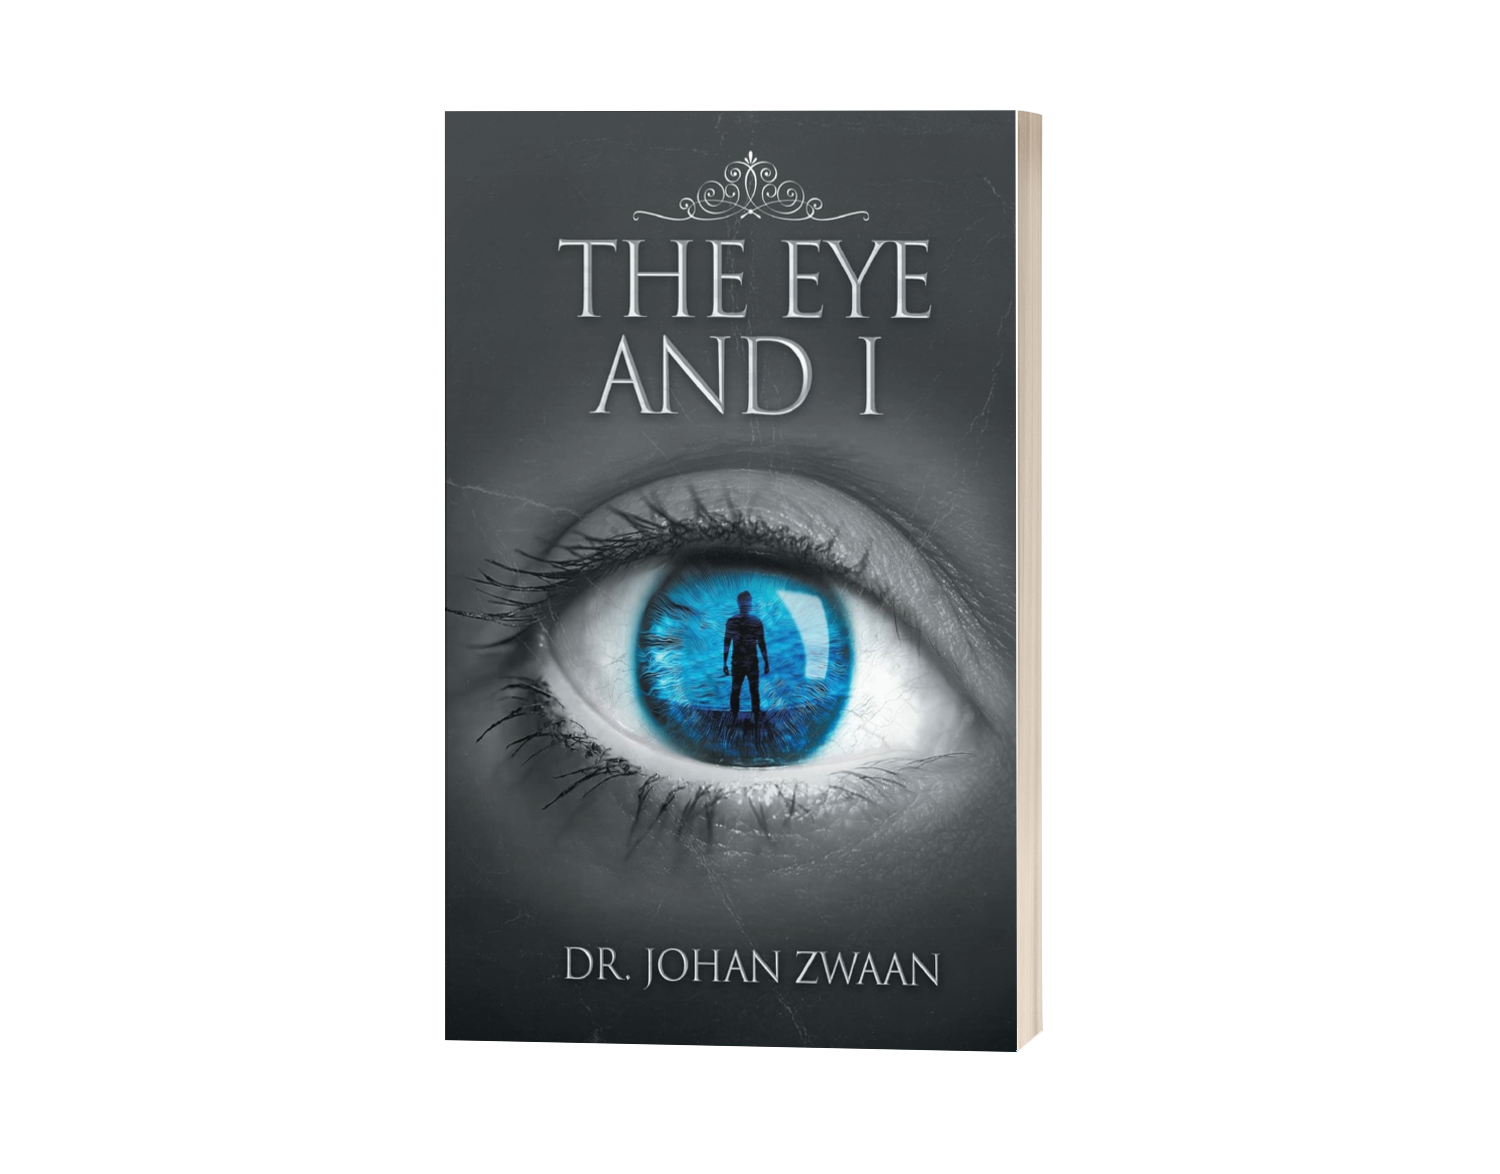 EYE DOCTOR-TURNED-AUTHOR ILLUMINATES RIVETING DISCOVERIES AND UNPRECEDENTED INSIGHTS IN CAPTIVATING NEW BOOK